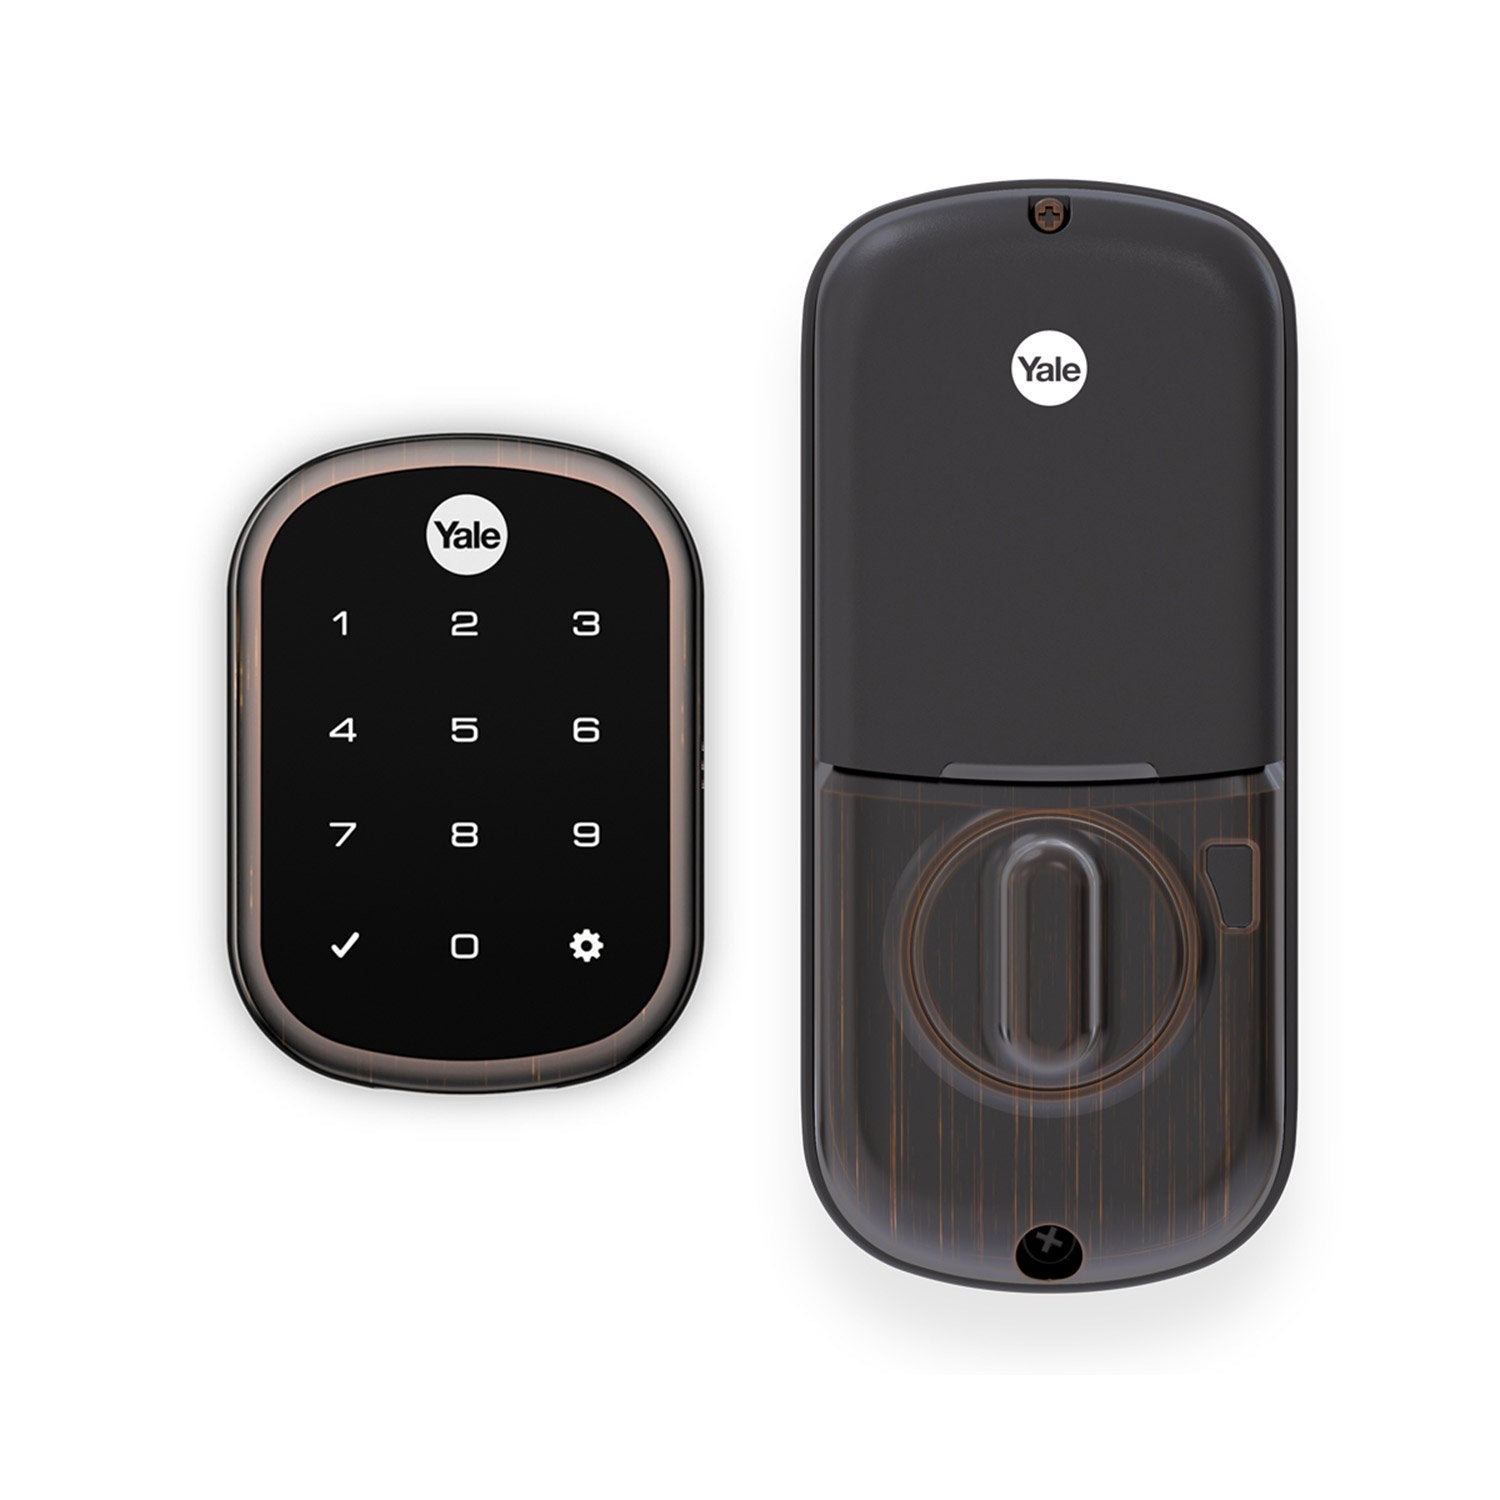 Yale Real Living Assure Lock SL With Z-Wave Plus (for Works with Ring Alarm Security System) - Oil-Rubbed Bronze